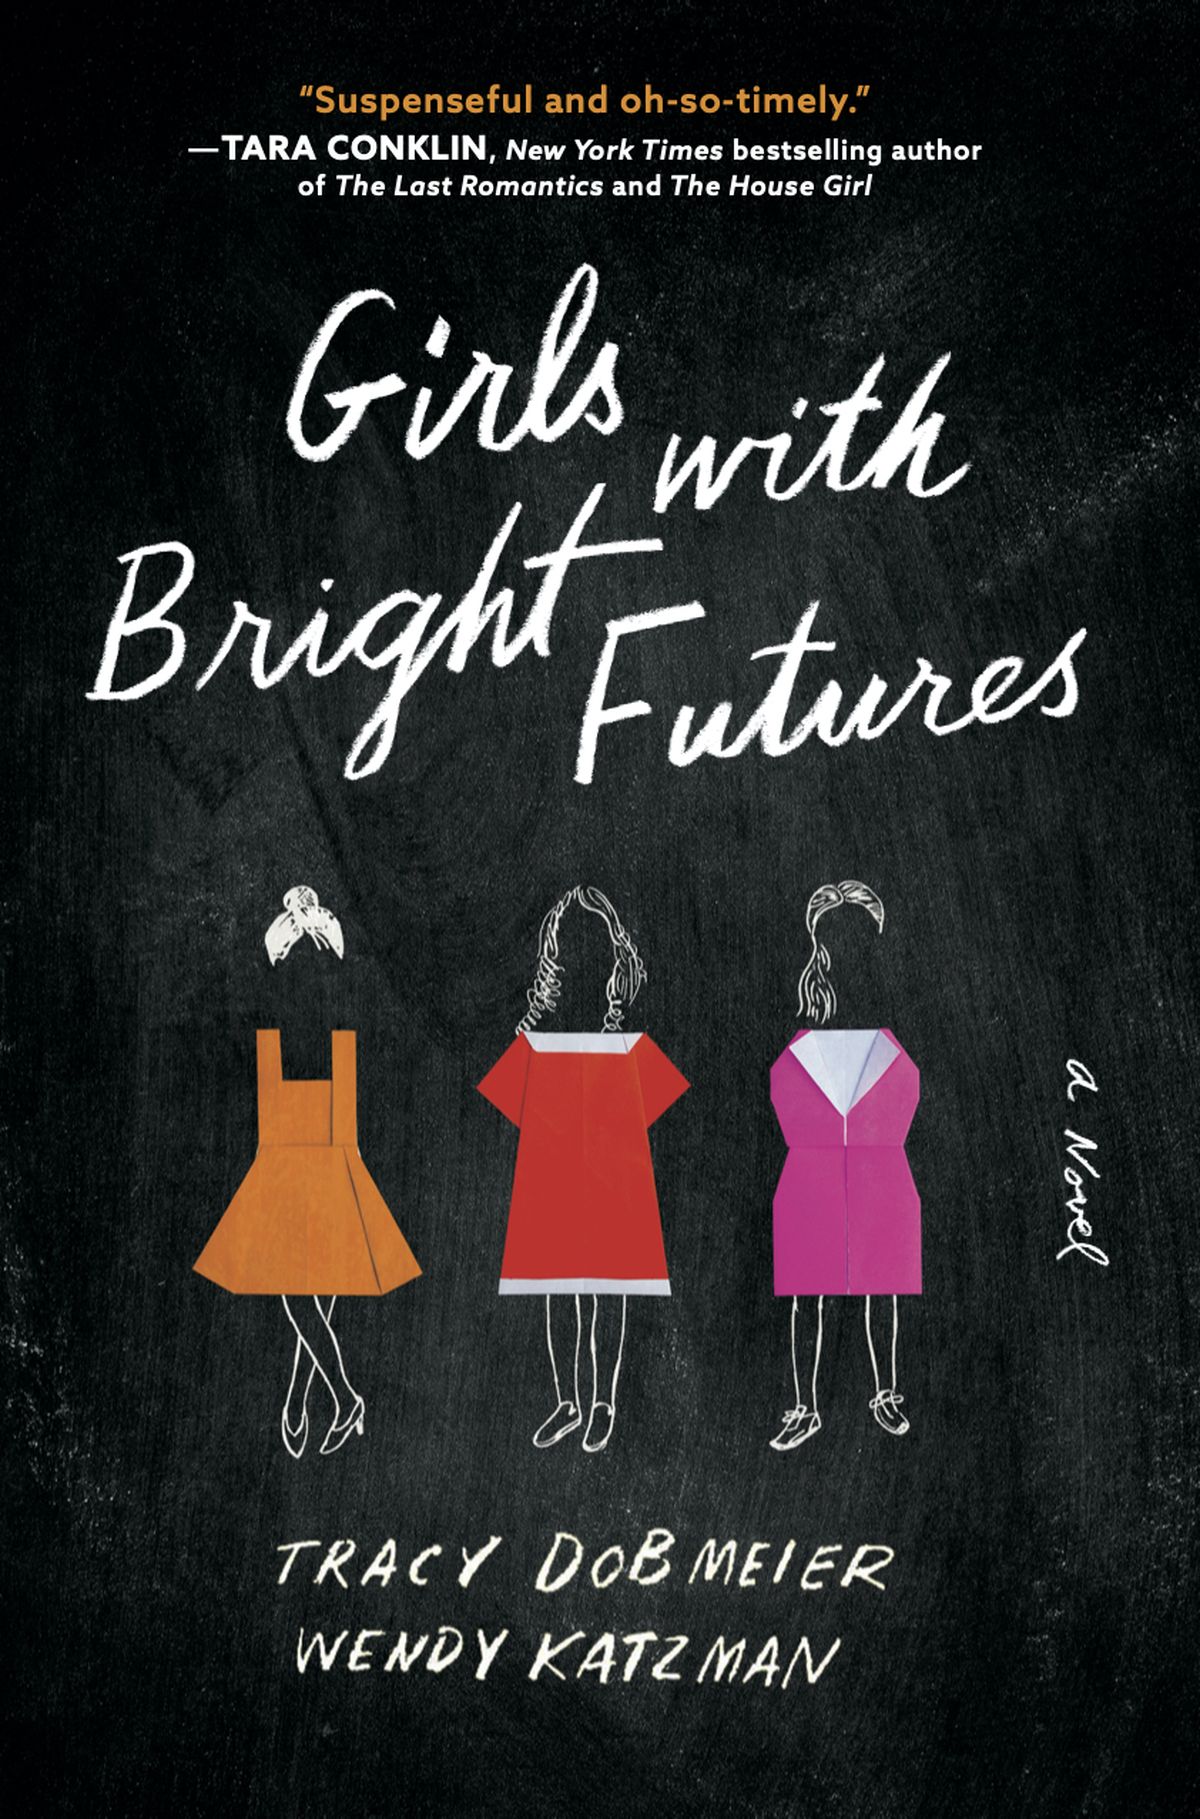 “Girls With Bright Futures” by Tracy Dobmeier and Wendy Katzman (Courtesy)